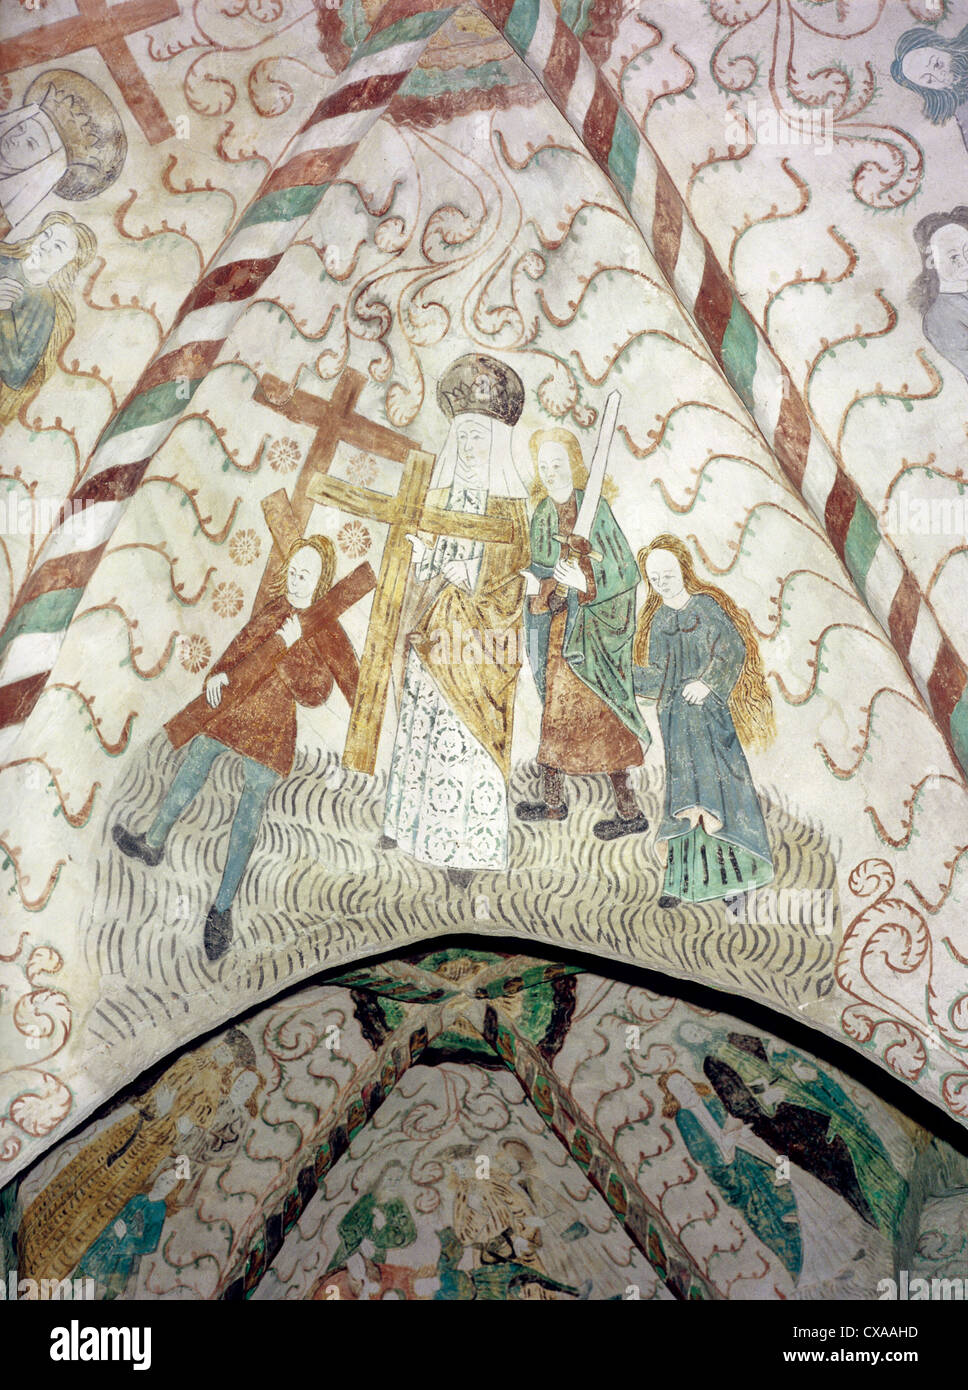 Vaulted ceiling with painted al secco murals in the 15th century medieval St. Lawrence Church of Lohja, Finland Stock Photo